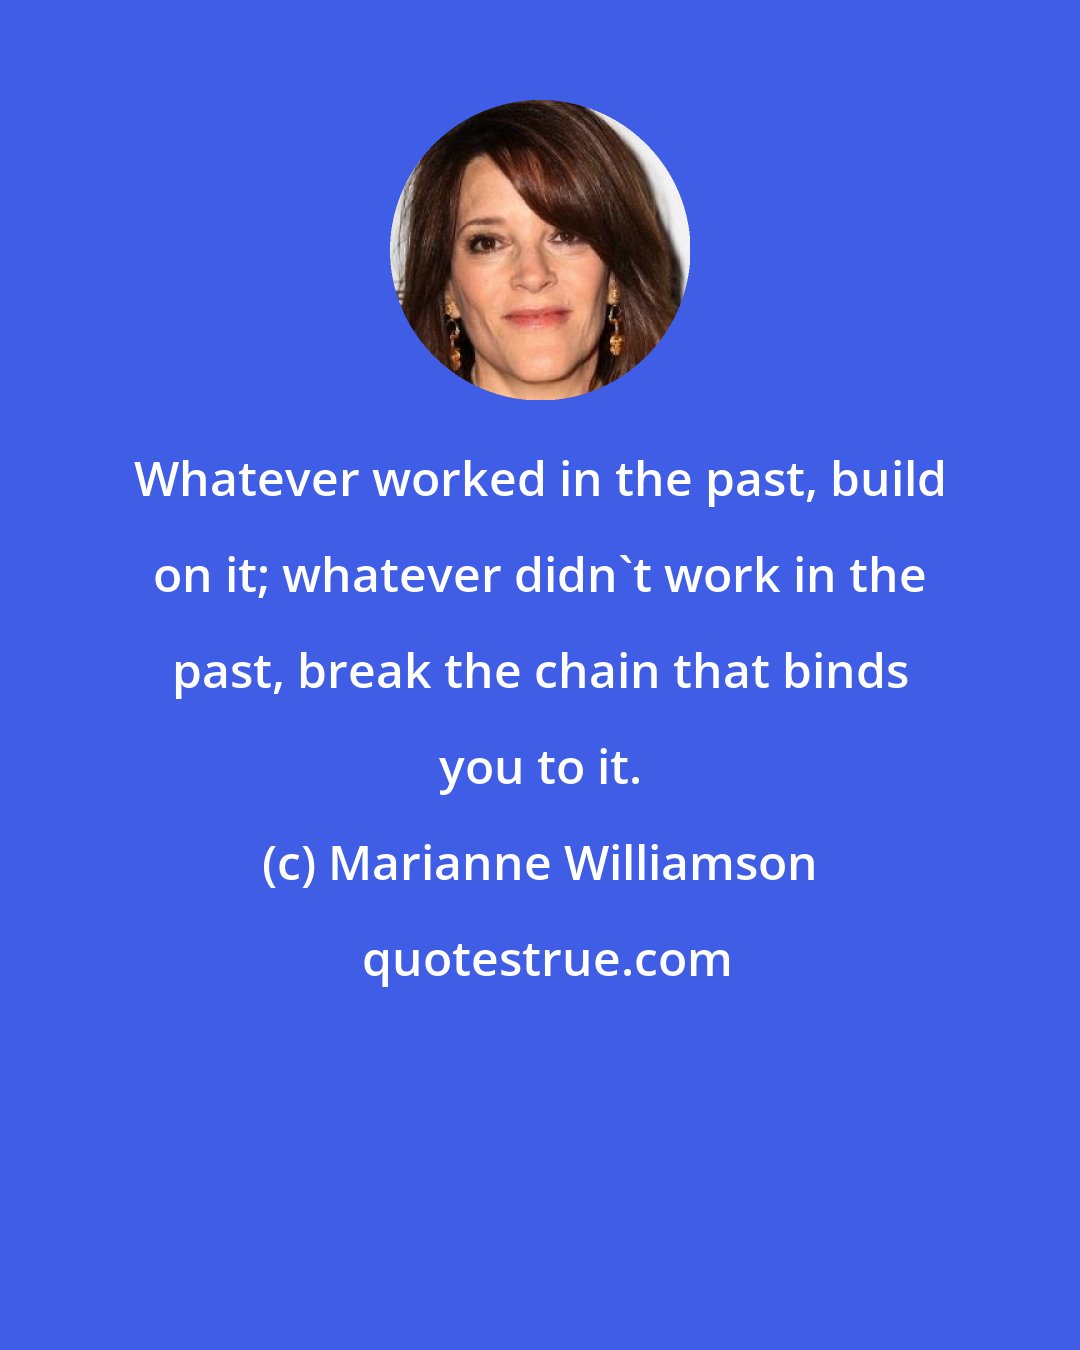 Marianne Williamson: Whatever worked in the past, build on it; whatever didn't work in the past, break the chain that binds you to it.